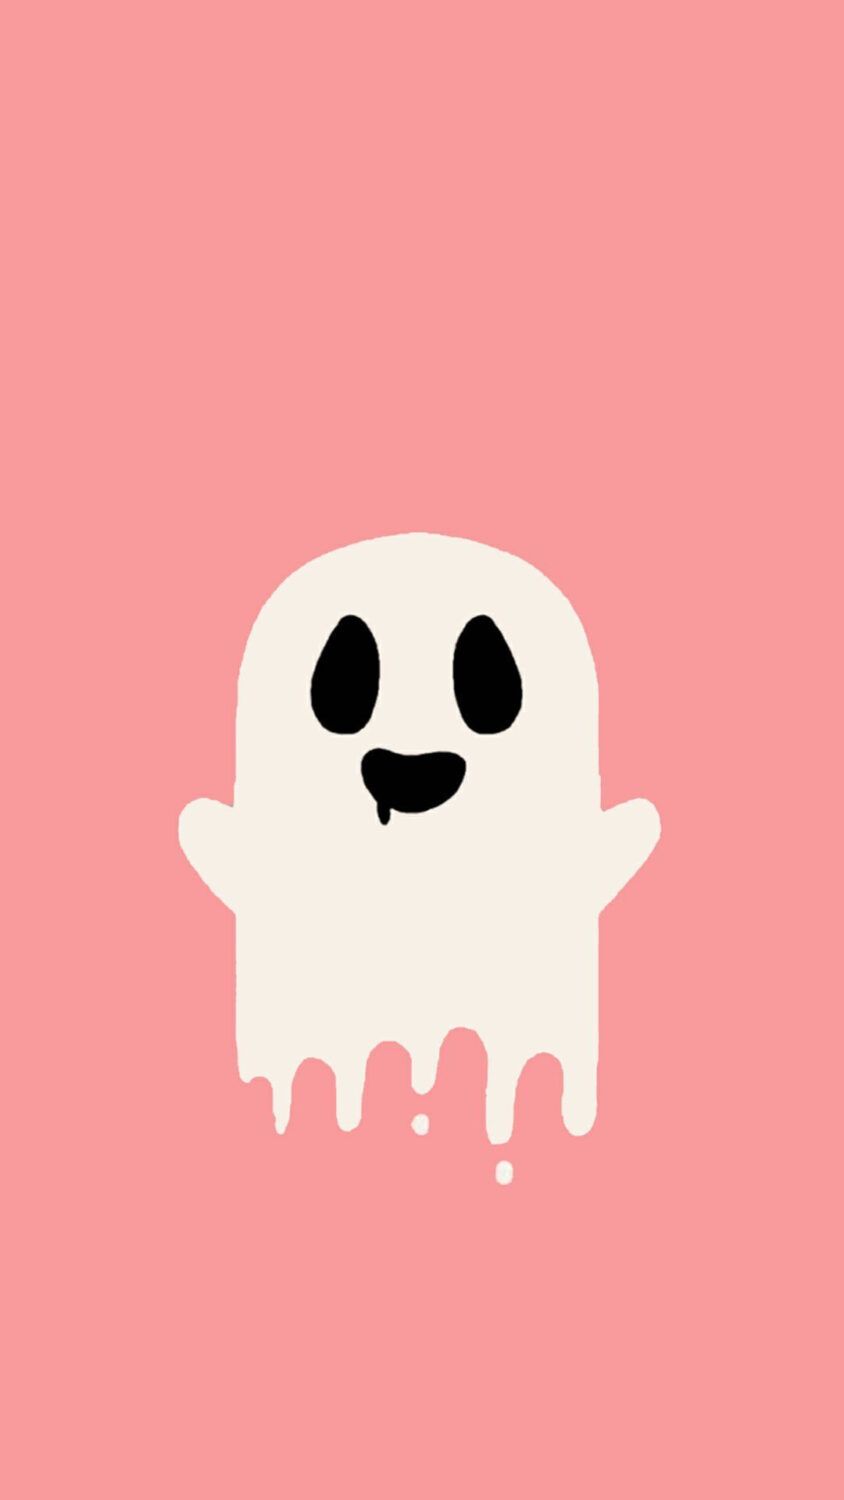 A ghost with a pink background - Ghost